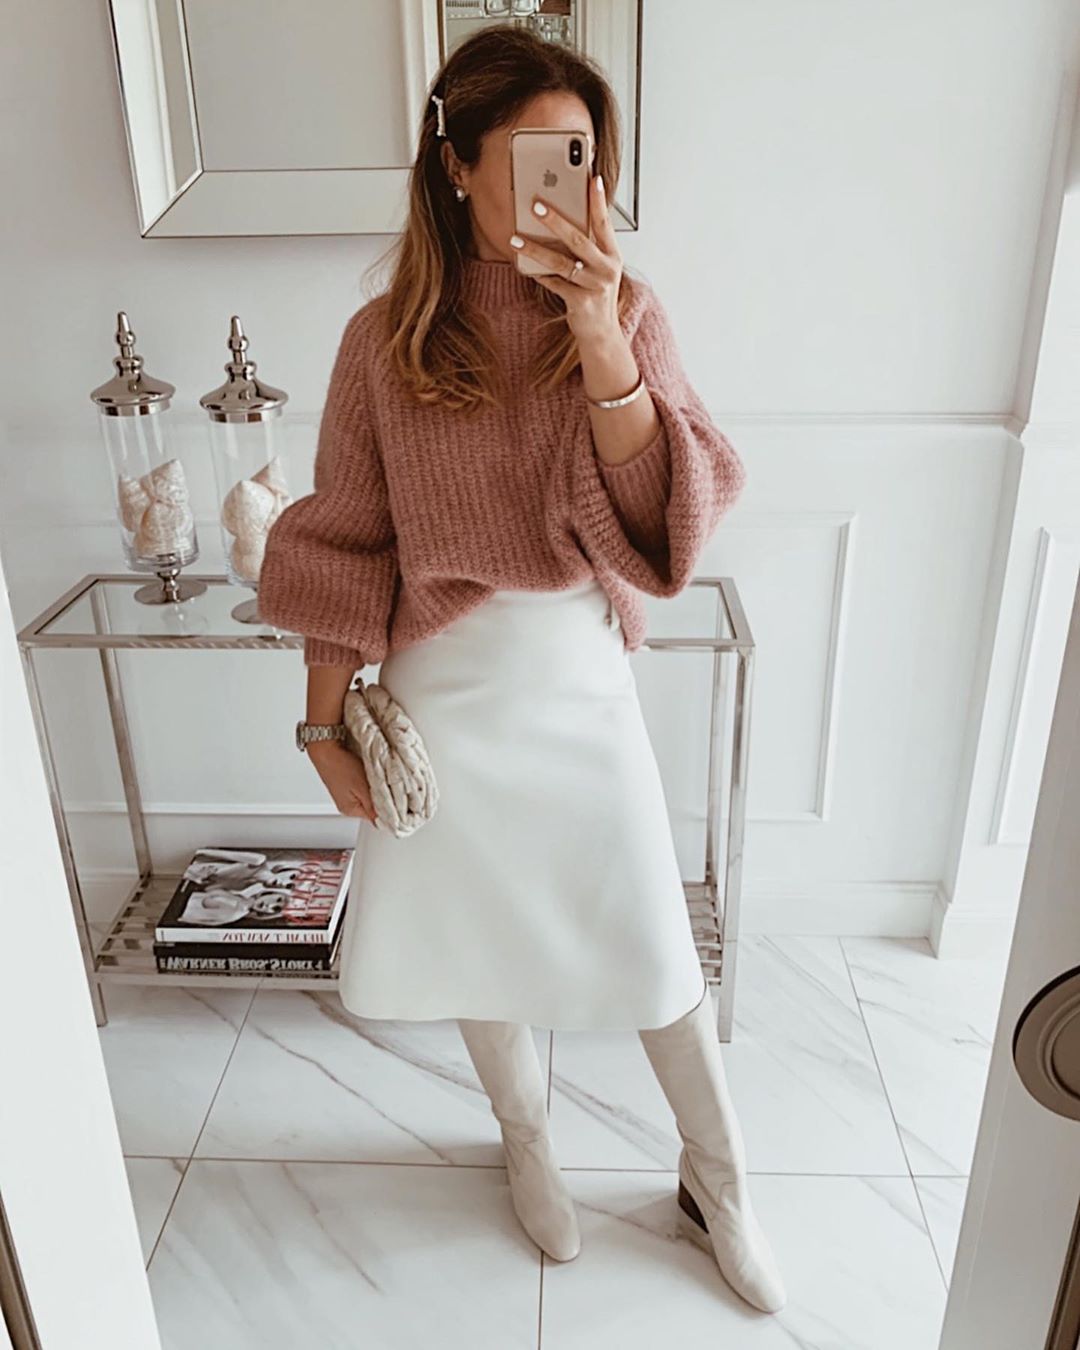 https://lavozdelmuro.net/wp-content/uploads/2020/12/outfits-invierno-mujer-15.jpg